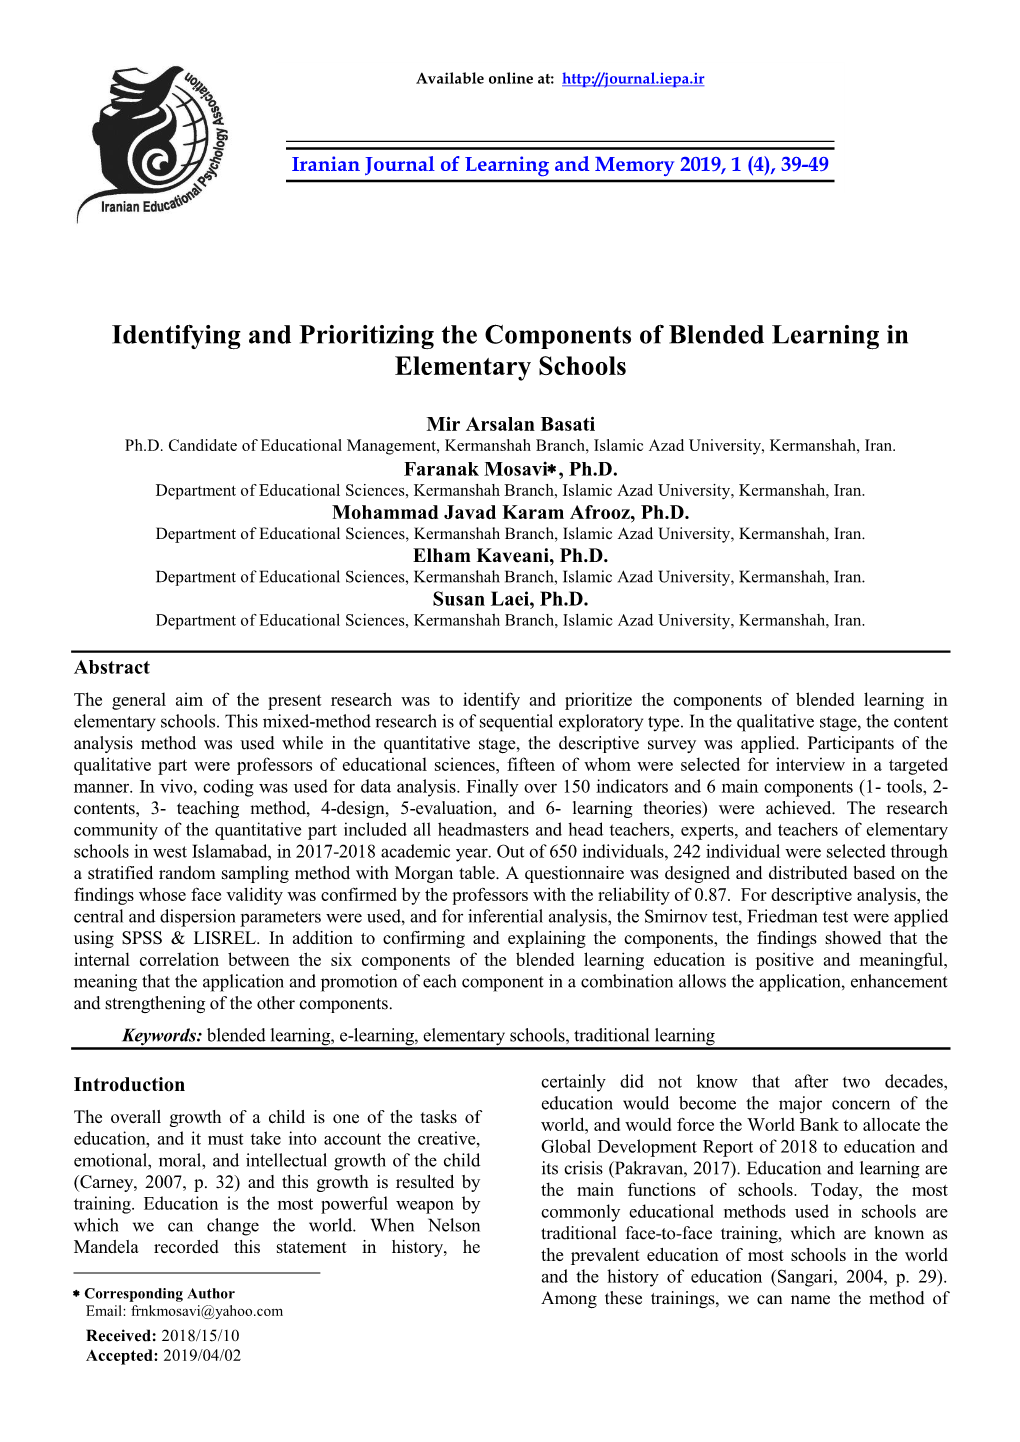 Identifying and Prioritizing the Components of Blended Learning in Elementary Schools